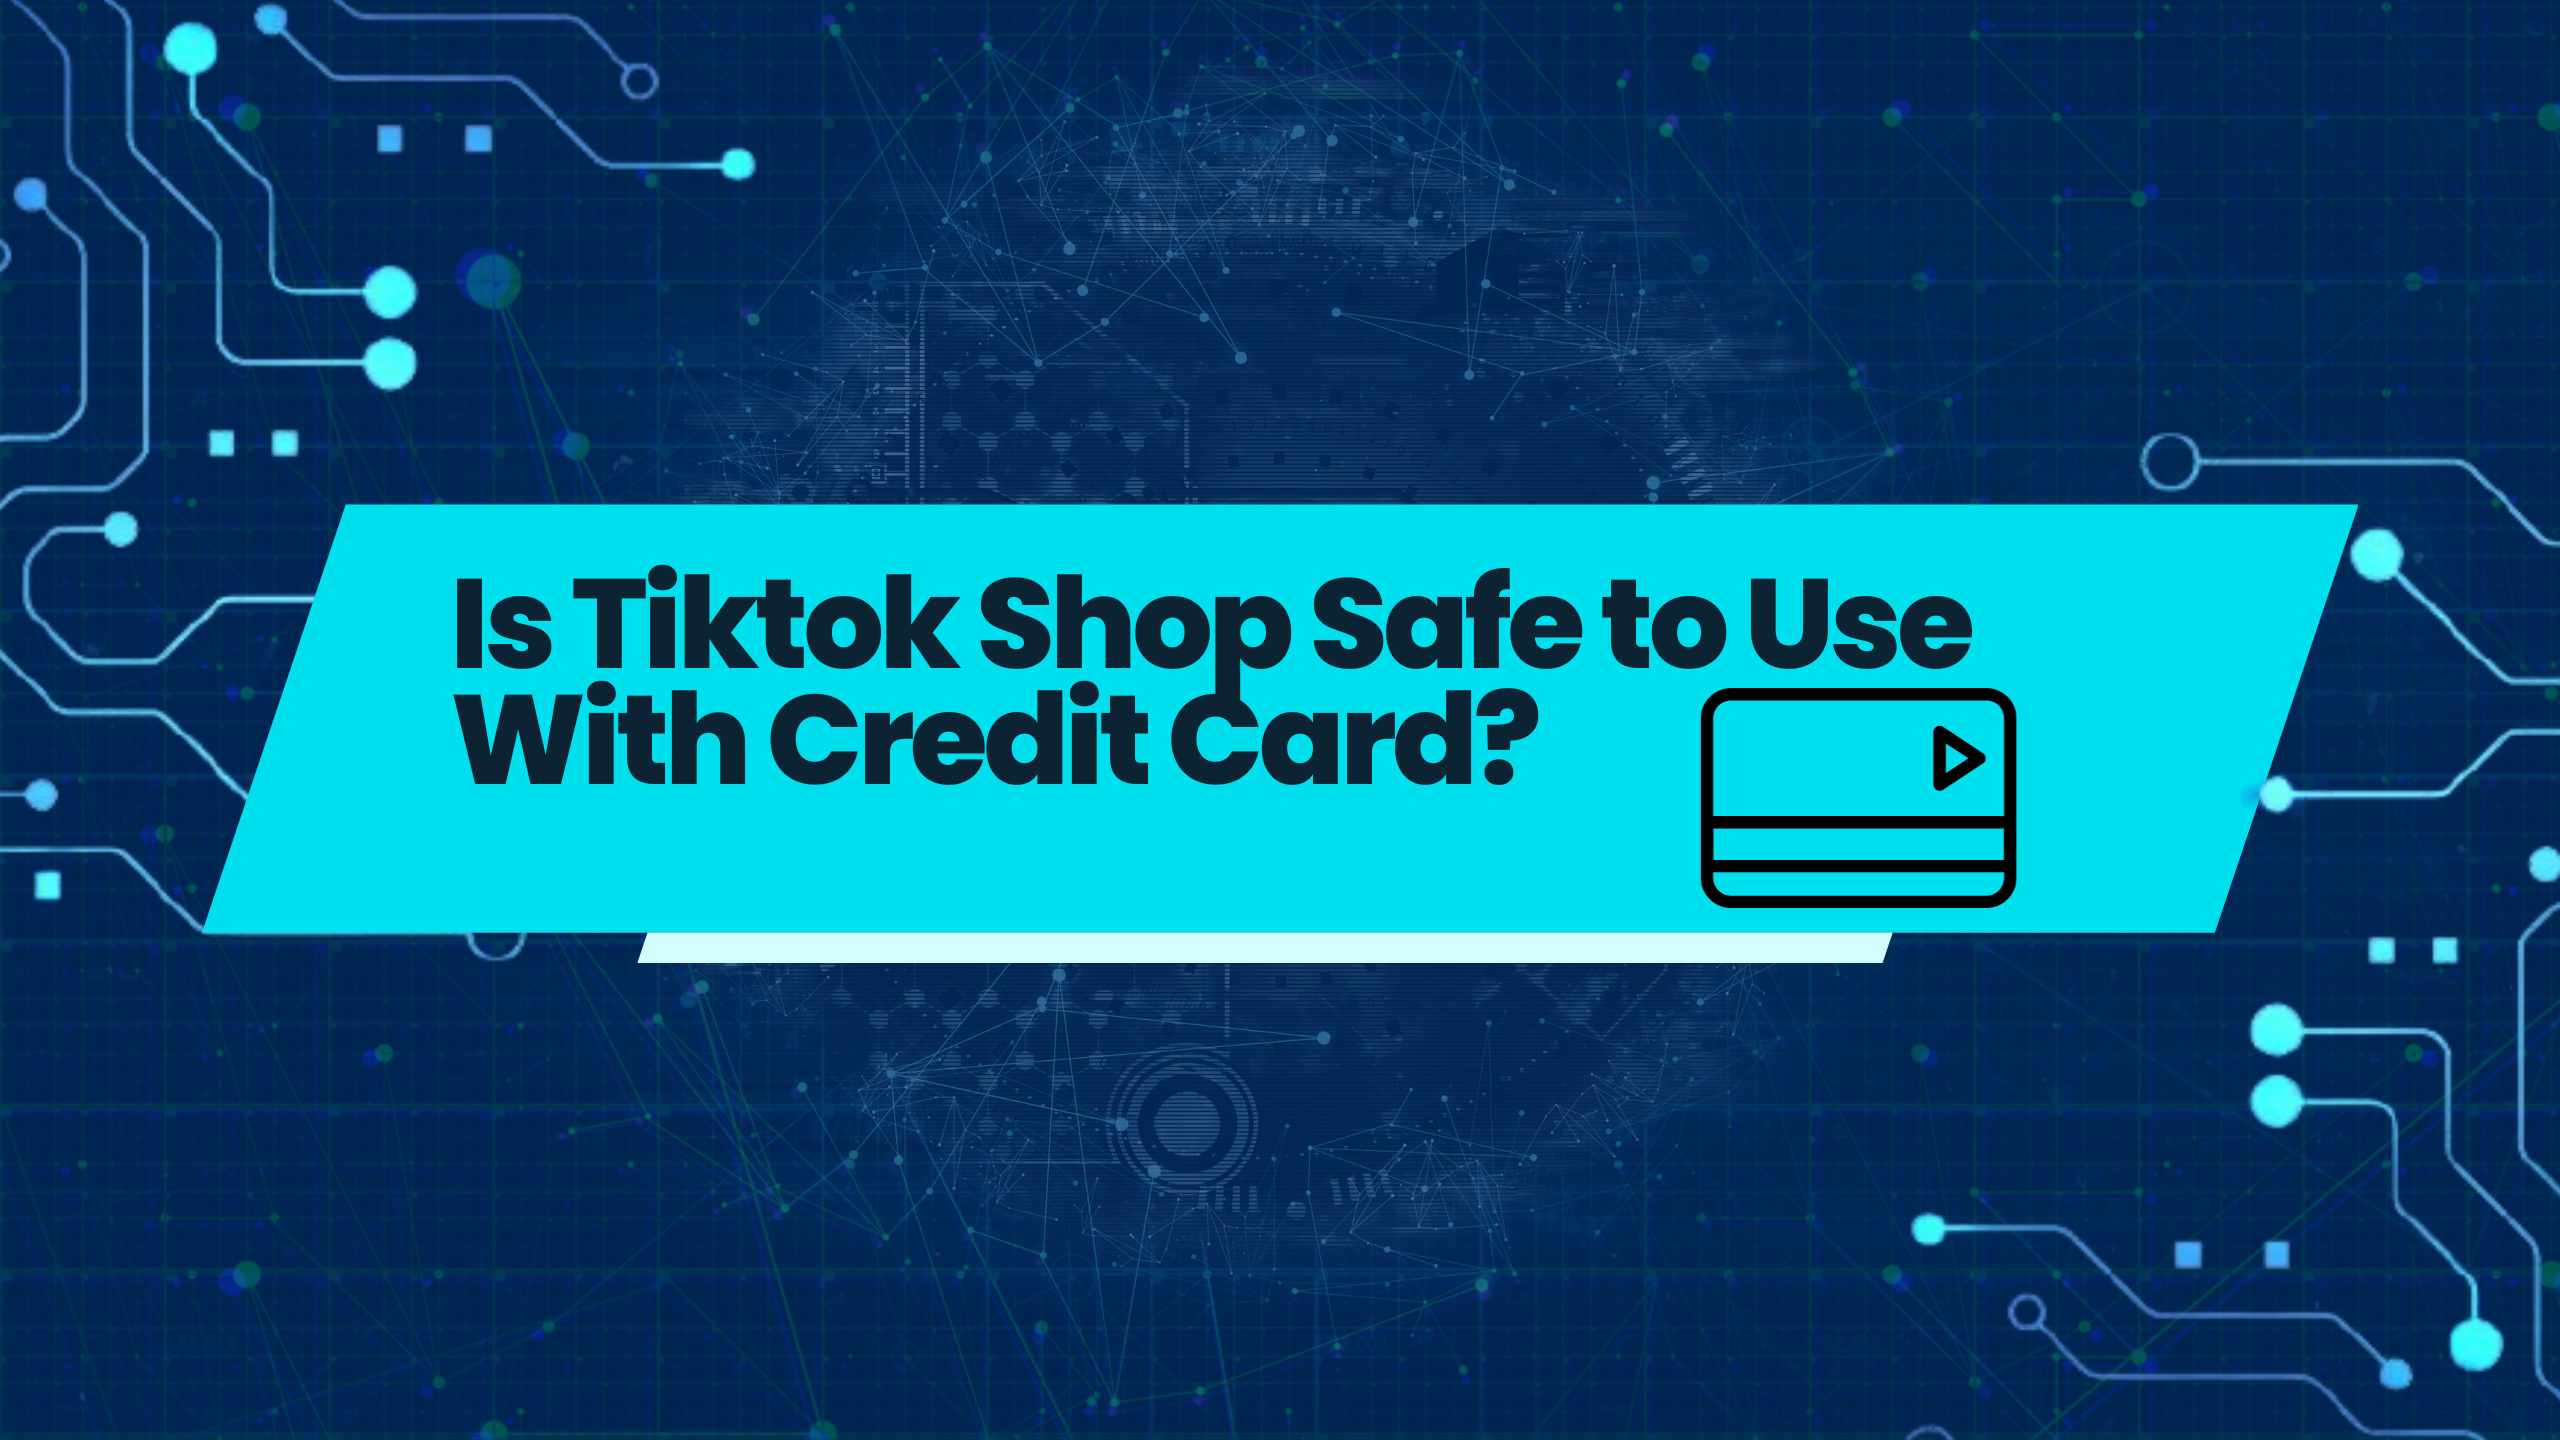 Is Tiktok Shop Safe to Use With Credit Card?